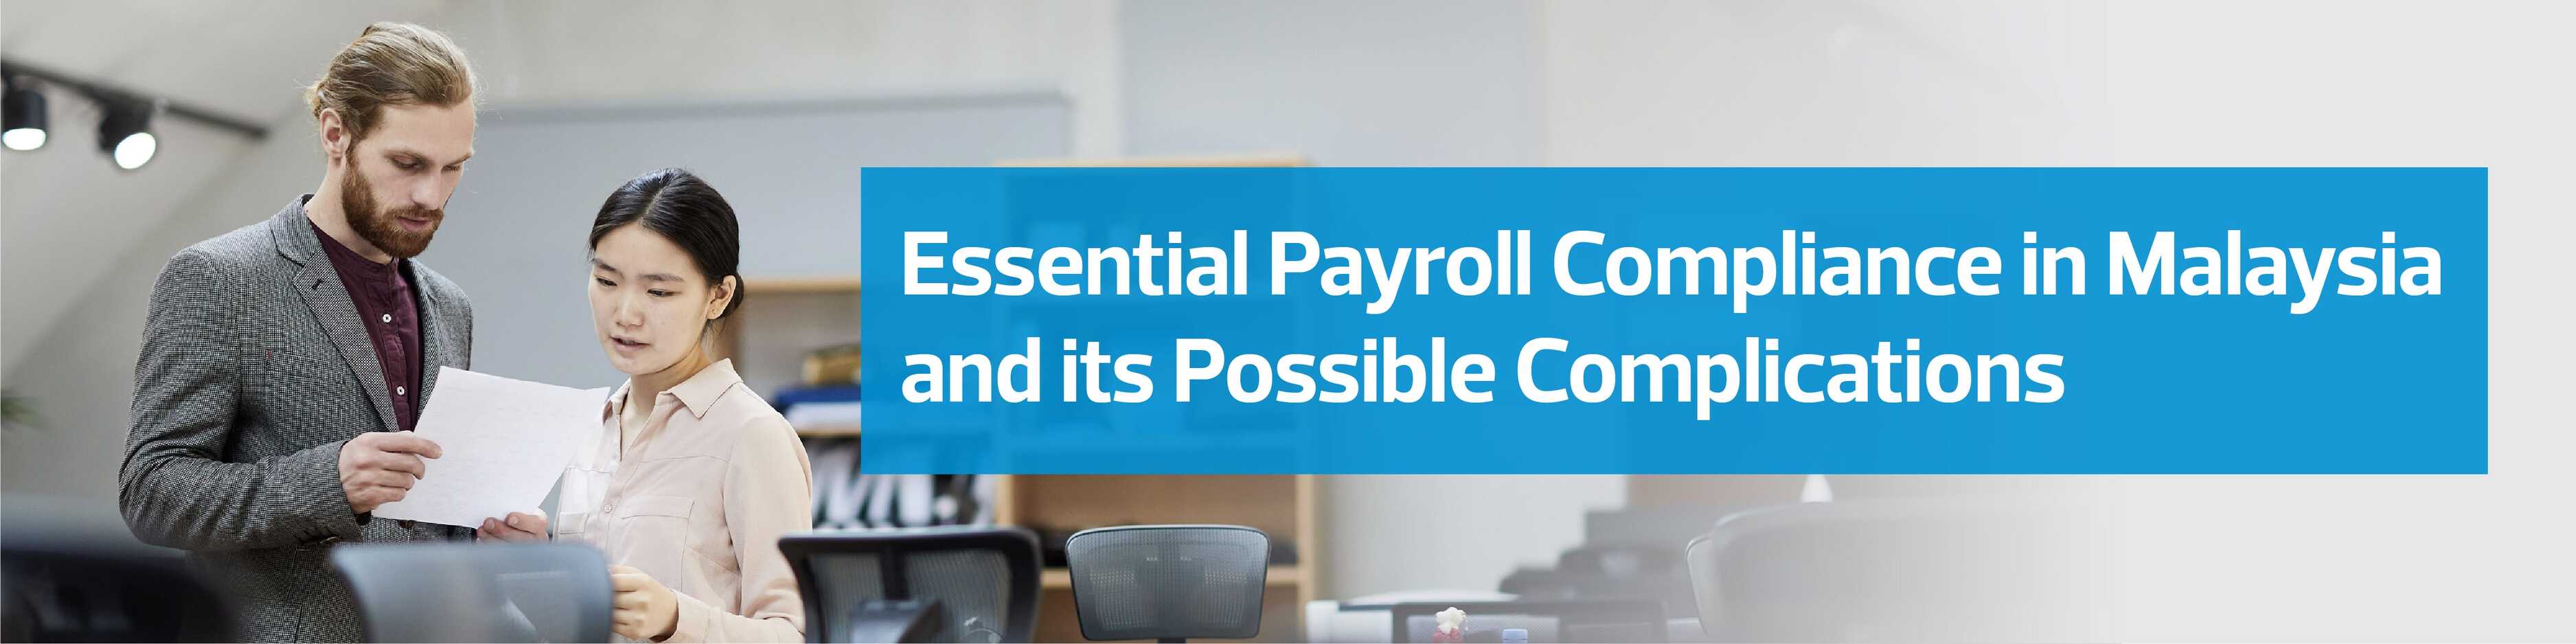 Essential payroll compliance